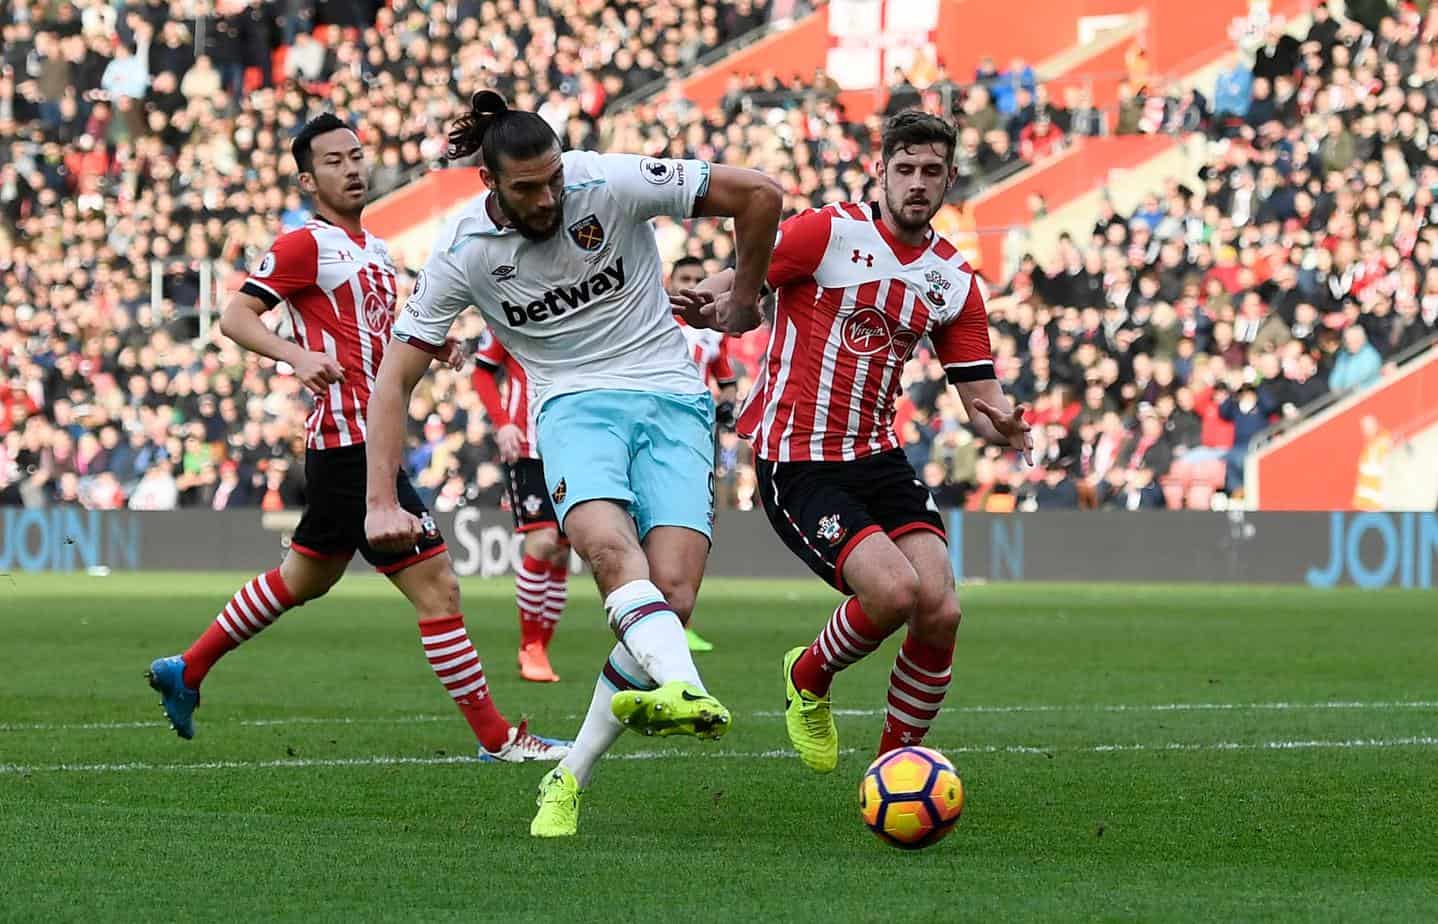 Southampton vs. West Ham – Betting Odds and Preview